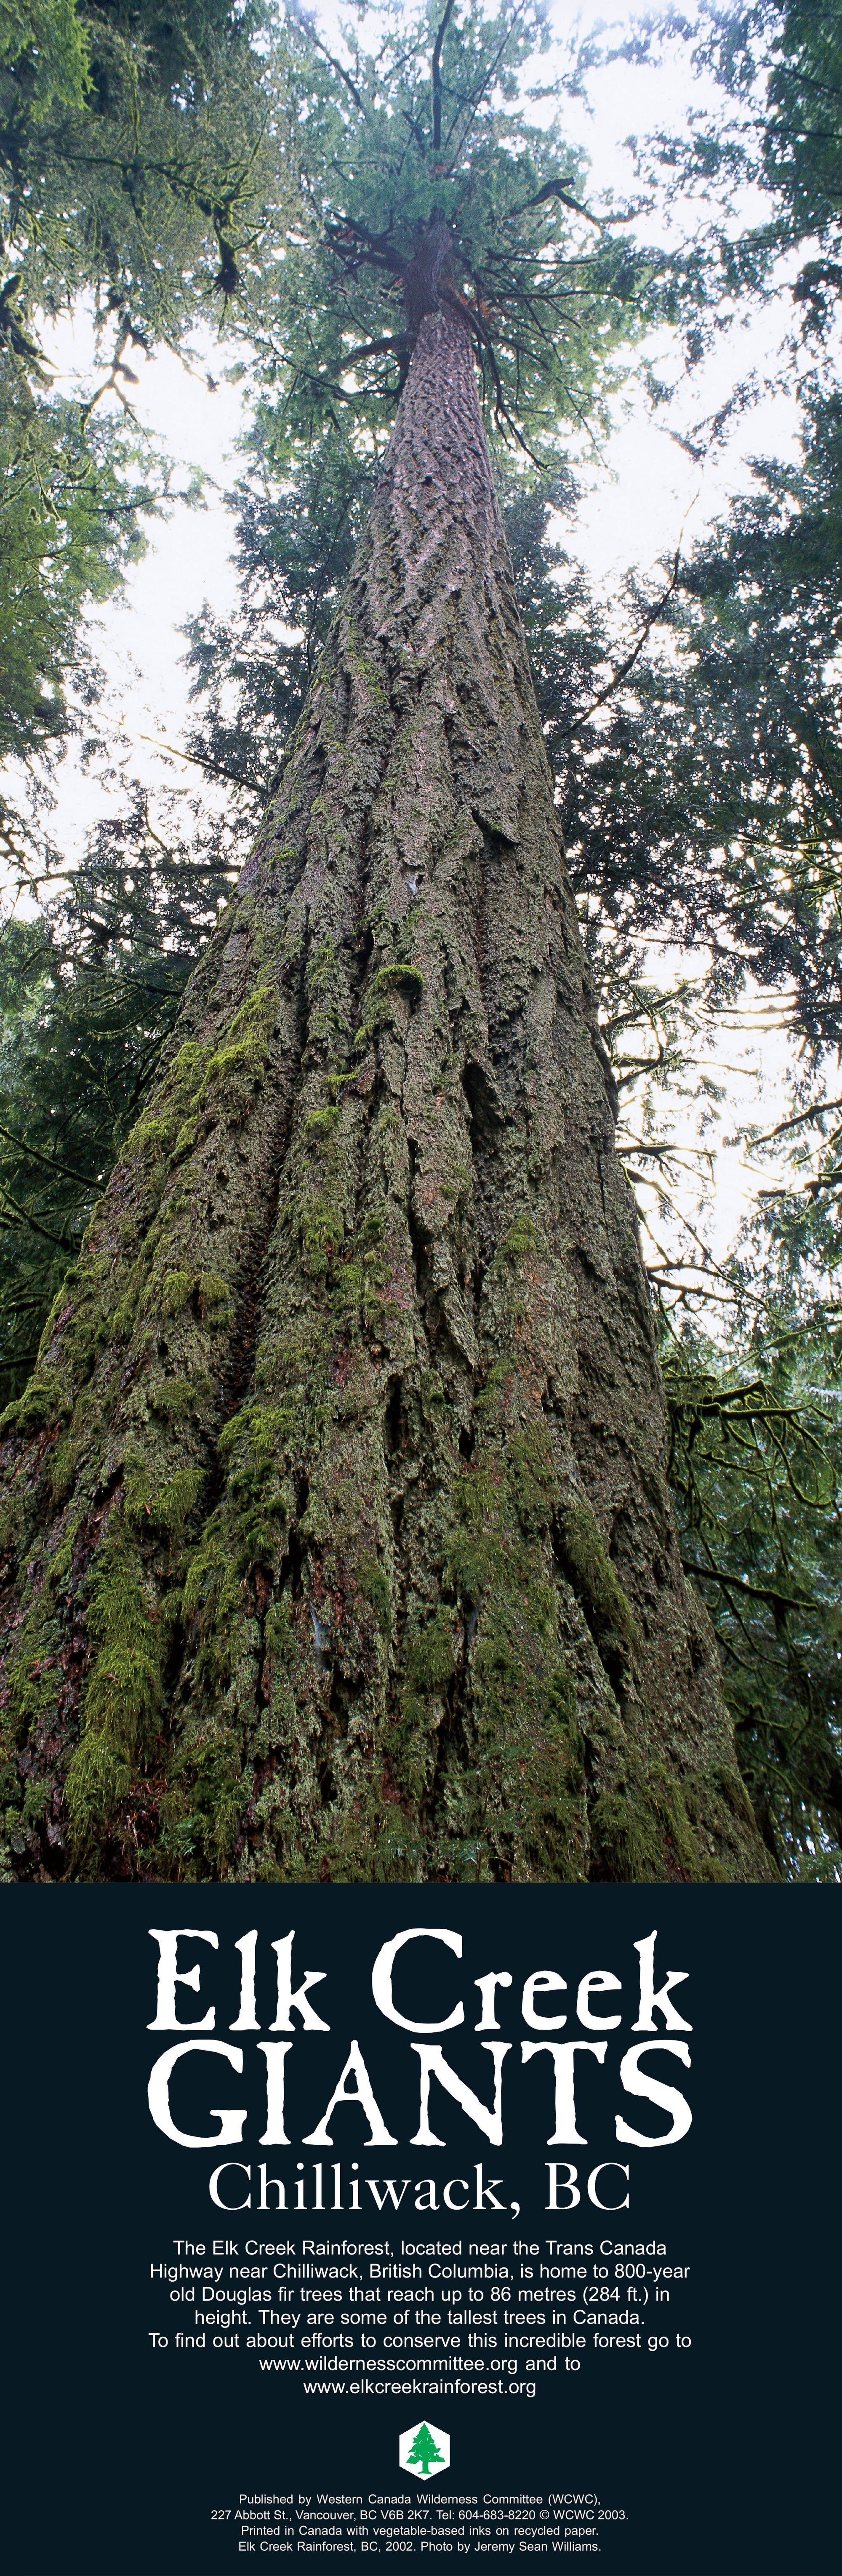 A poster of an old-growth tree. Text over the image says "Elk Creek Giants. Chilliwack, BC." End of image description.